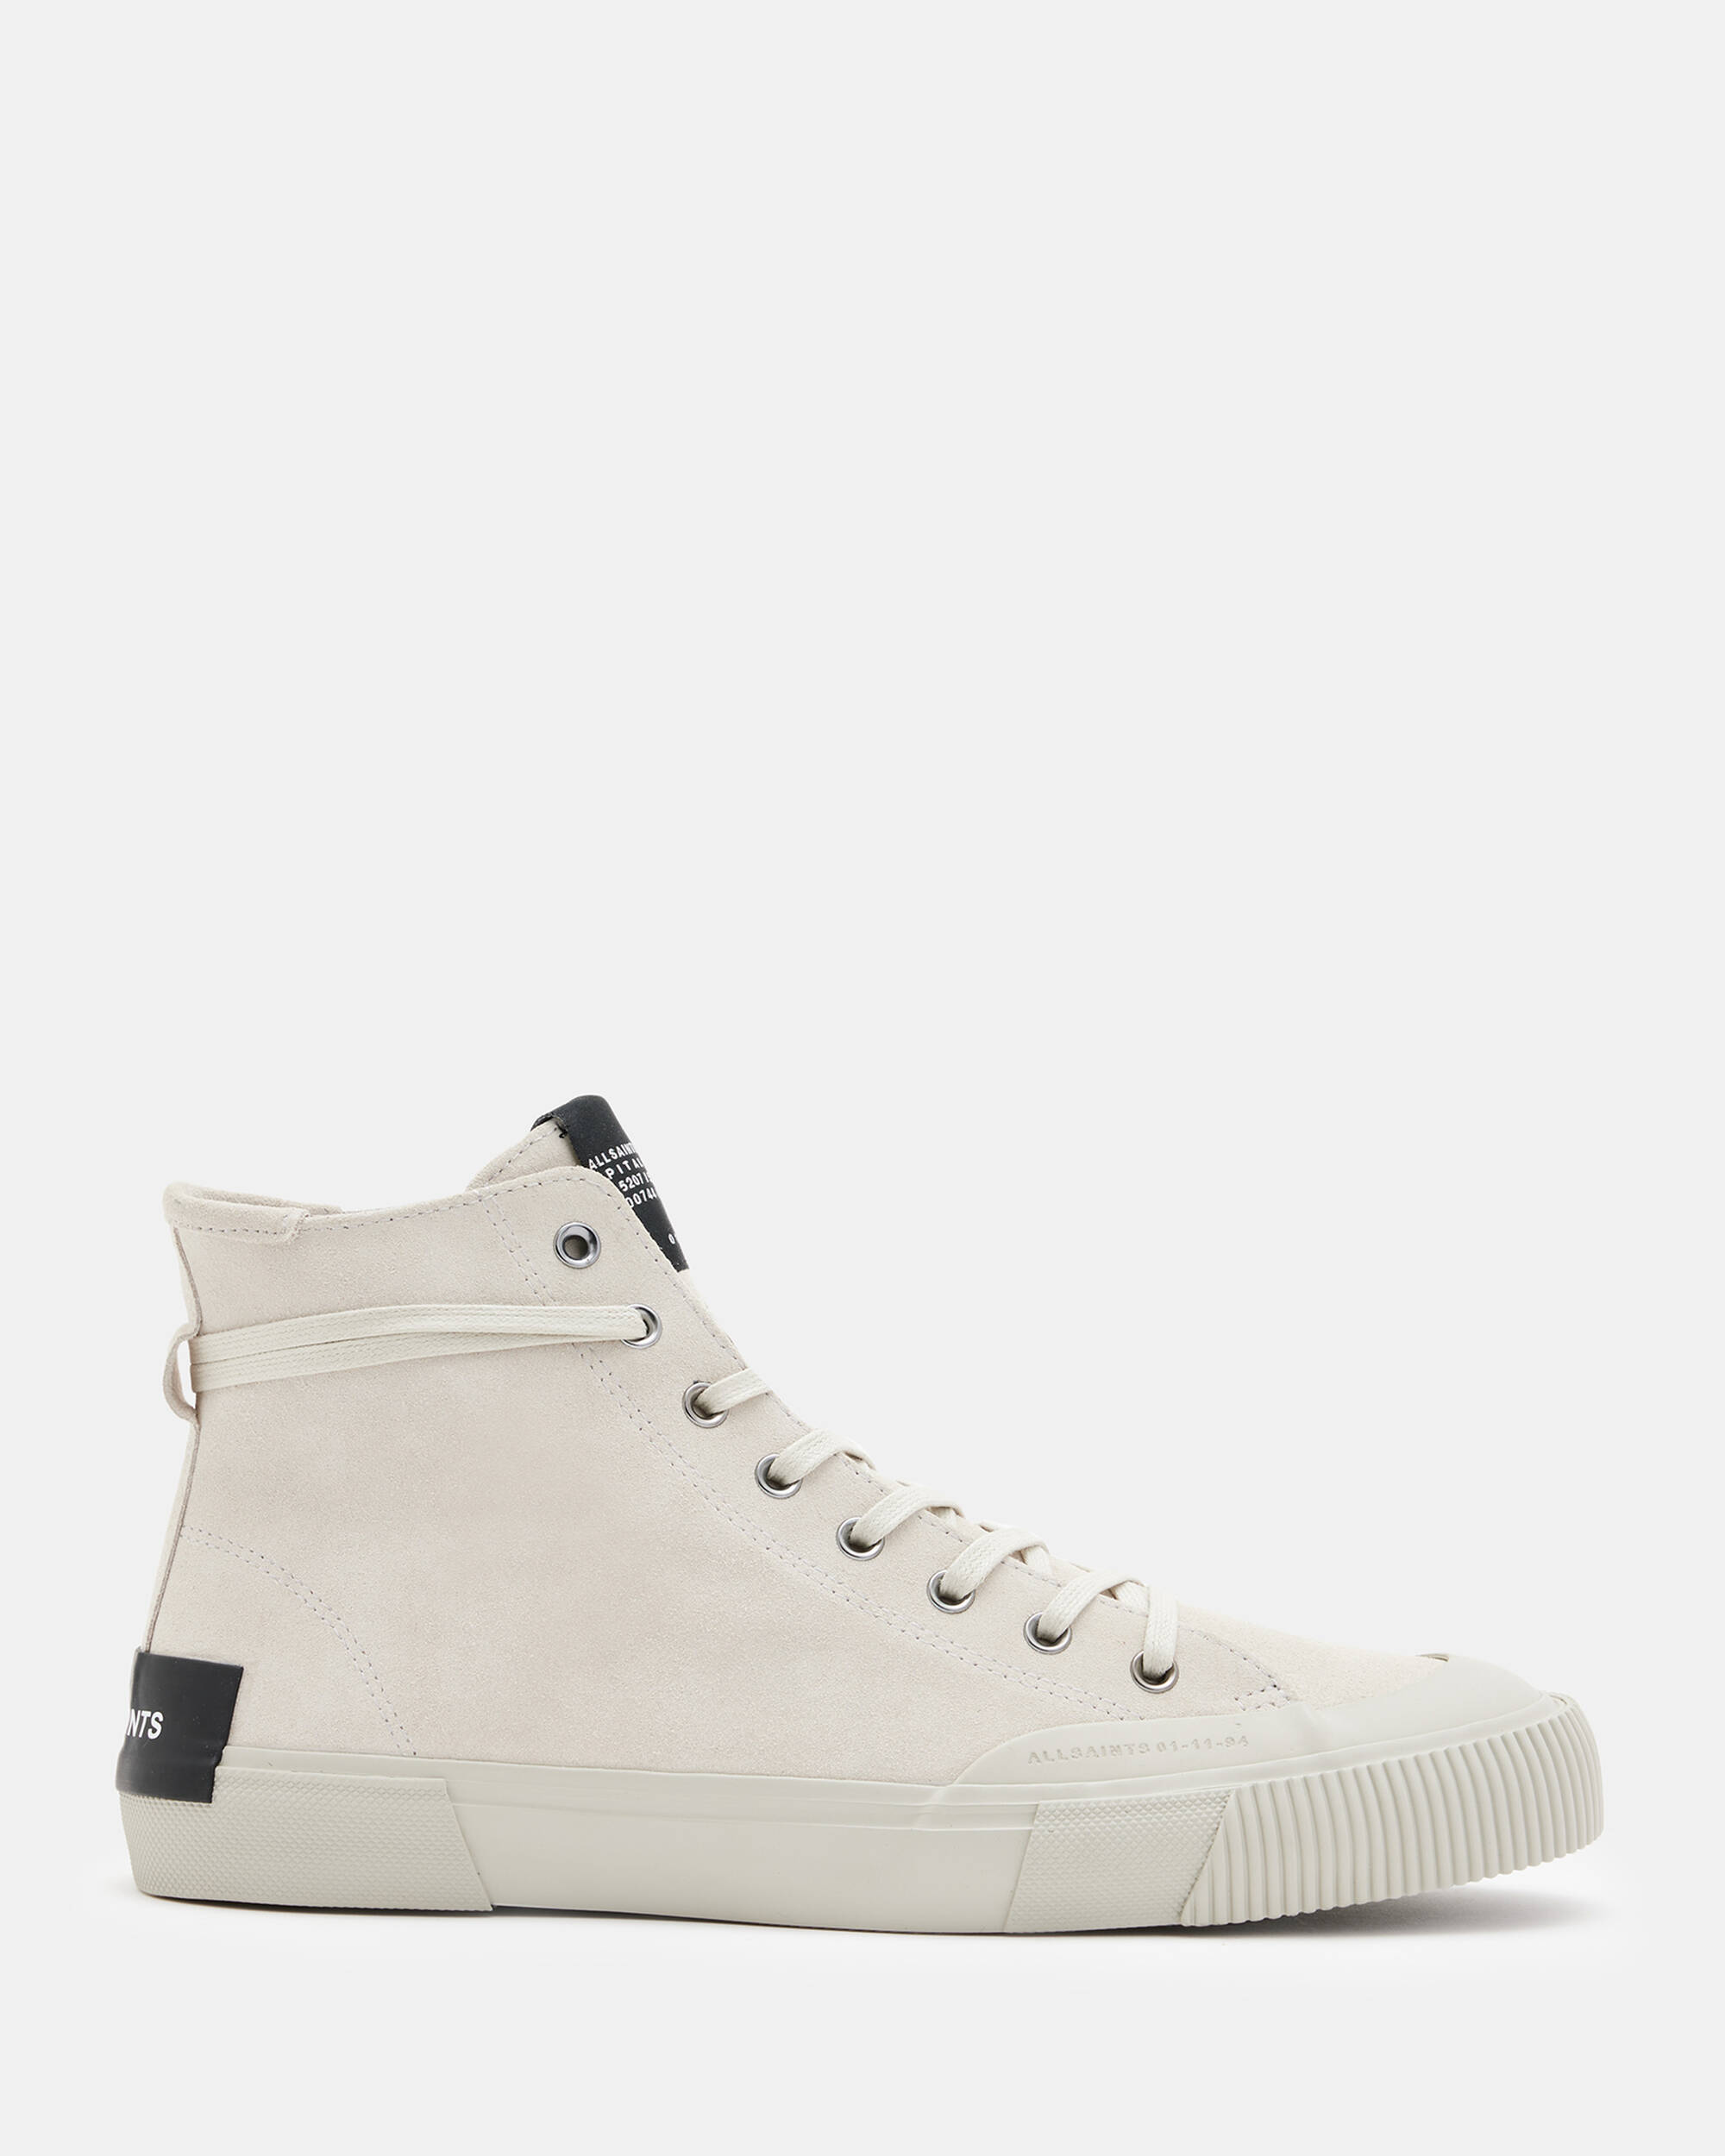 Dumont Suede High Top Sneakers Chalk White | ALLSAINTS US